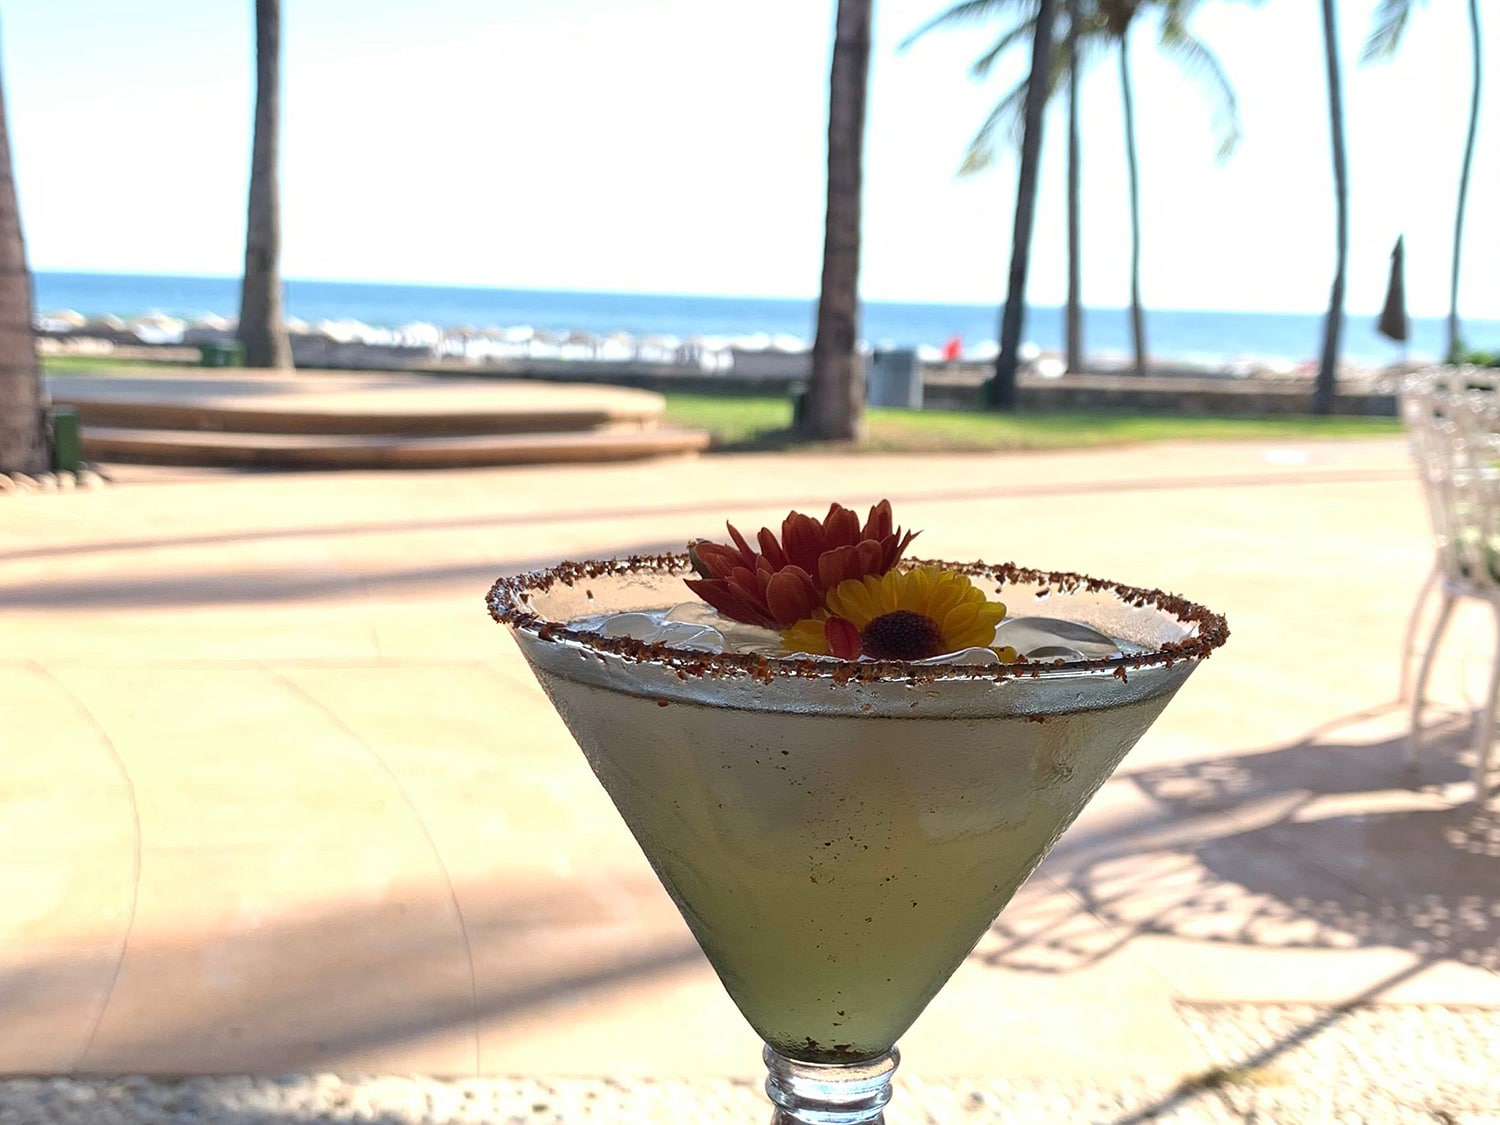 The South Margarita from the Pierre Mundo Imperial hotel in Mexico.